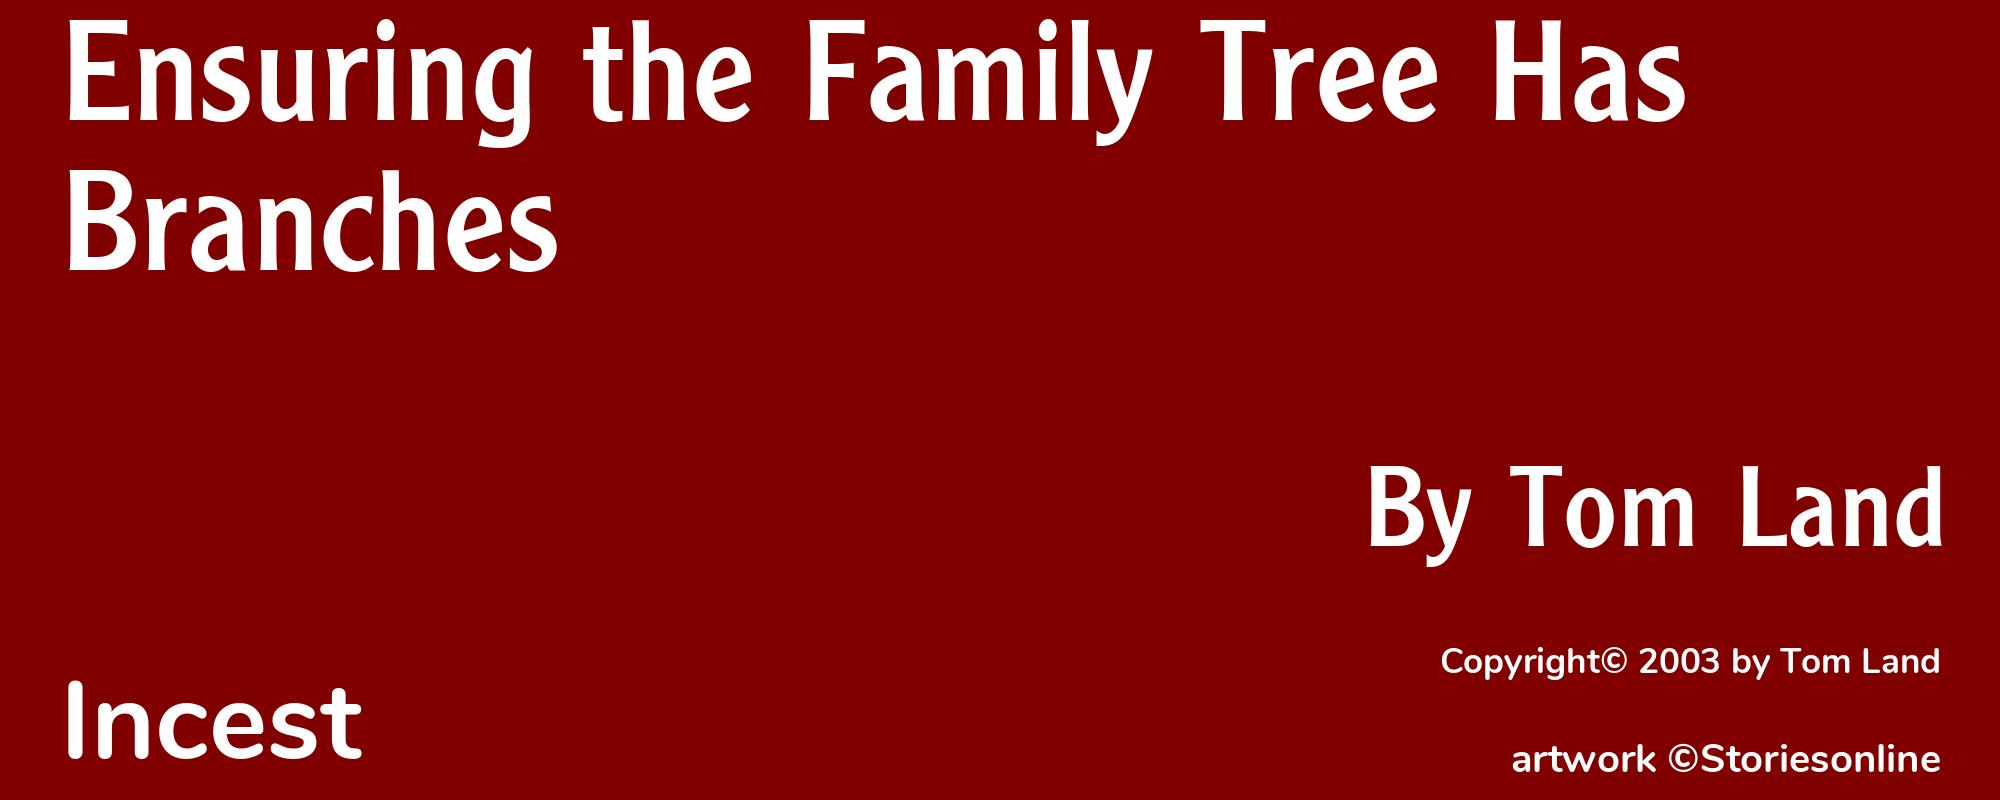 Ensuring the Family Tree Has Branches - Cover